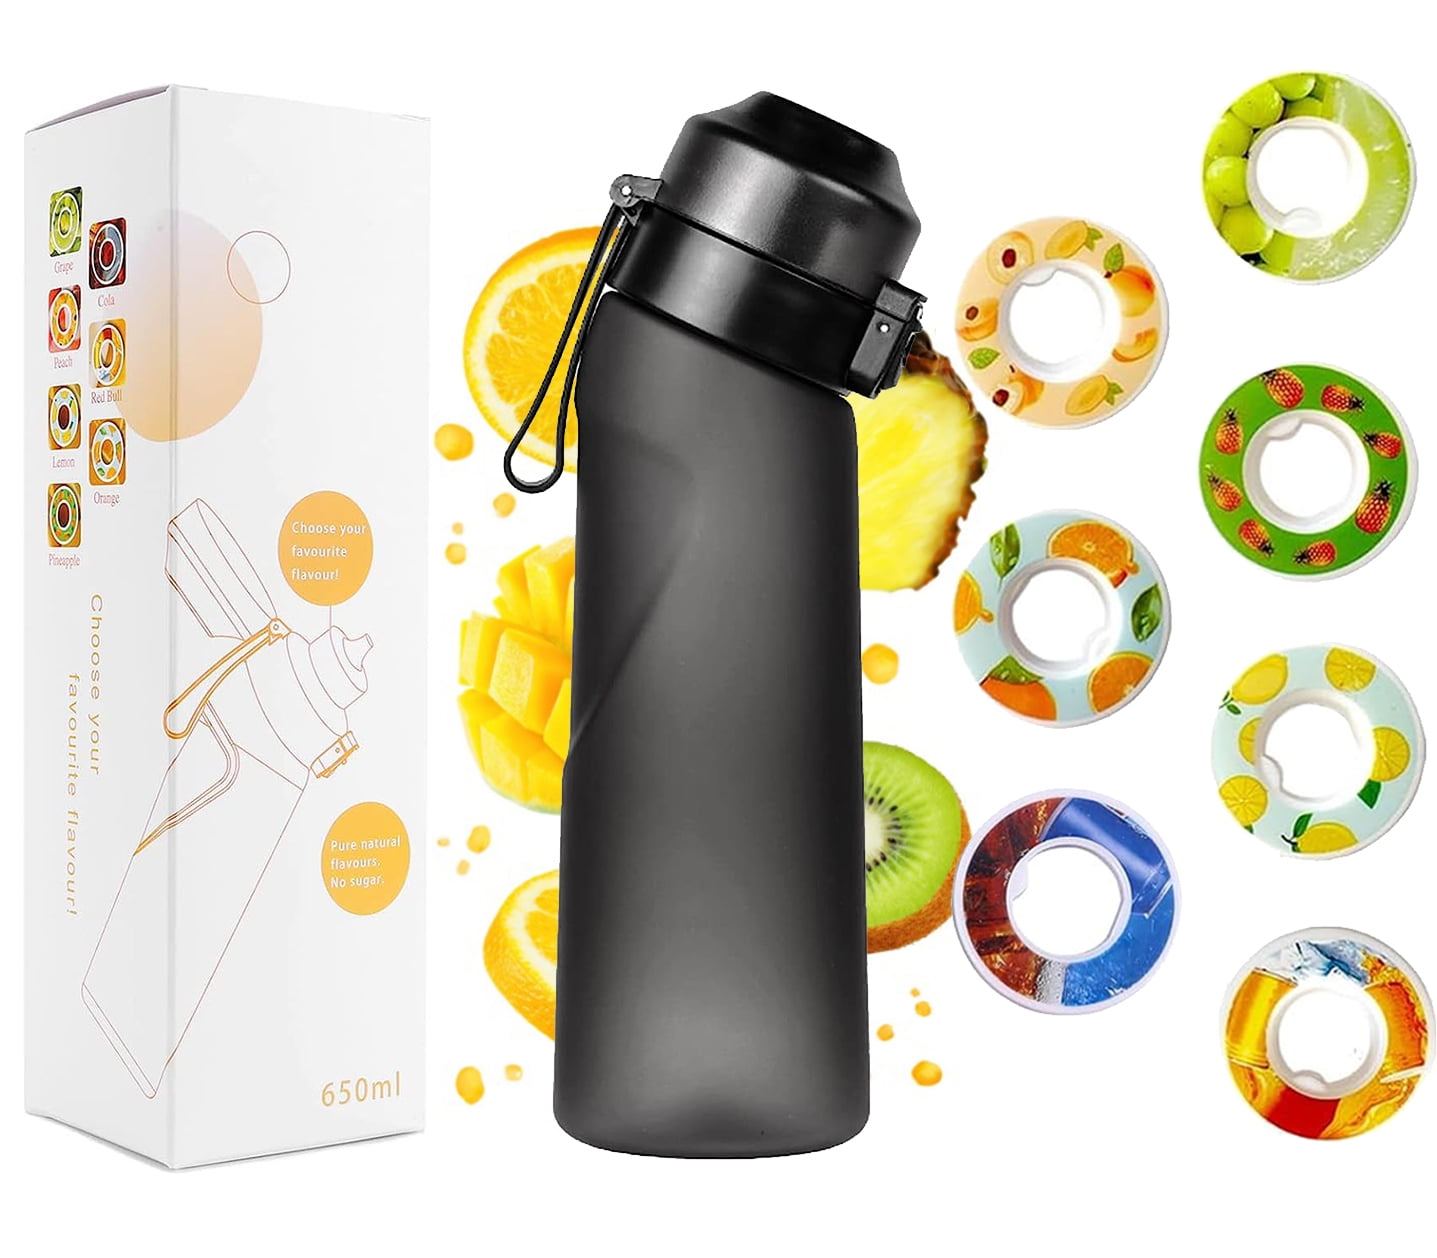 Sakura Train New Fruit-scented Sports Air Water Bottle Entry-level Set,  Bpa-free, 650ml Fruit-infused Water Bottle With 1 Flavor Capsule Sugar-free  Juice Cup, Ideal For Gym And Outdoor Gift